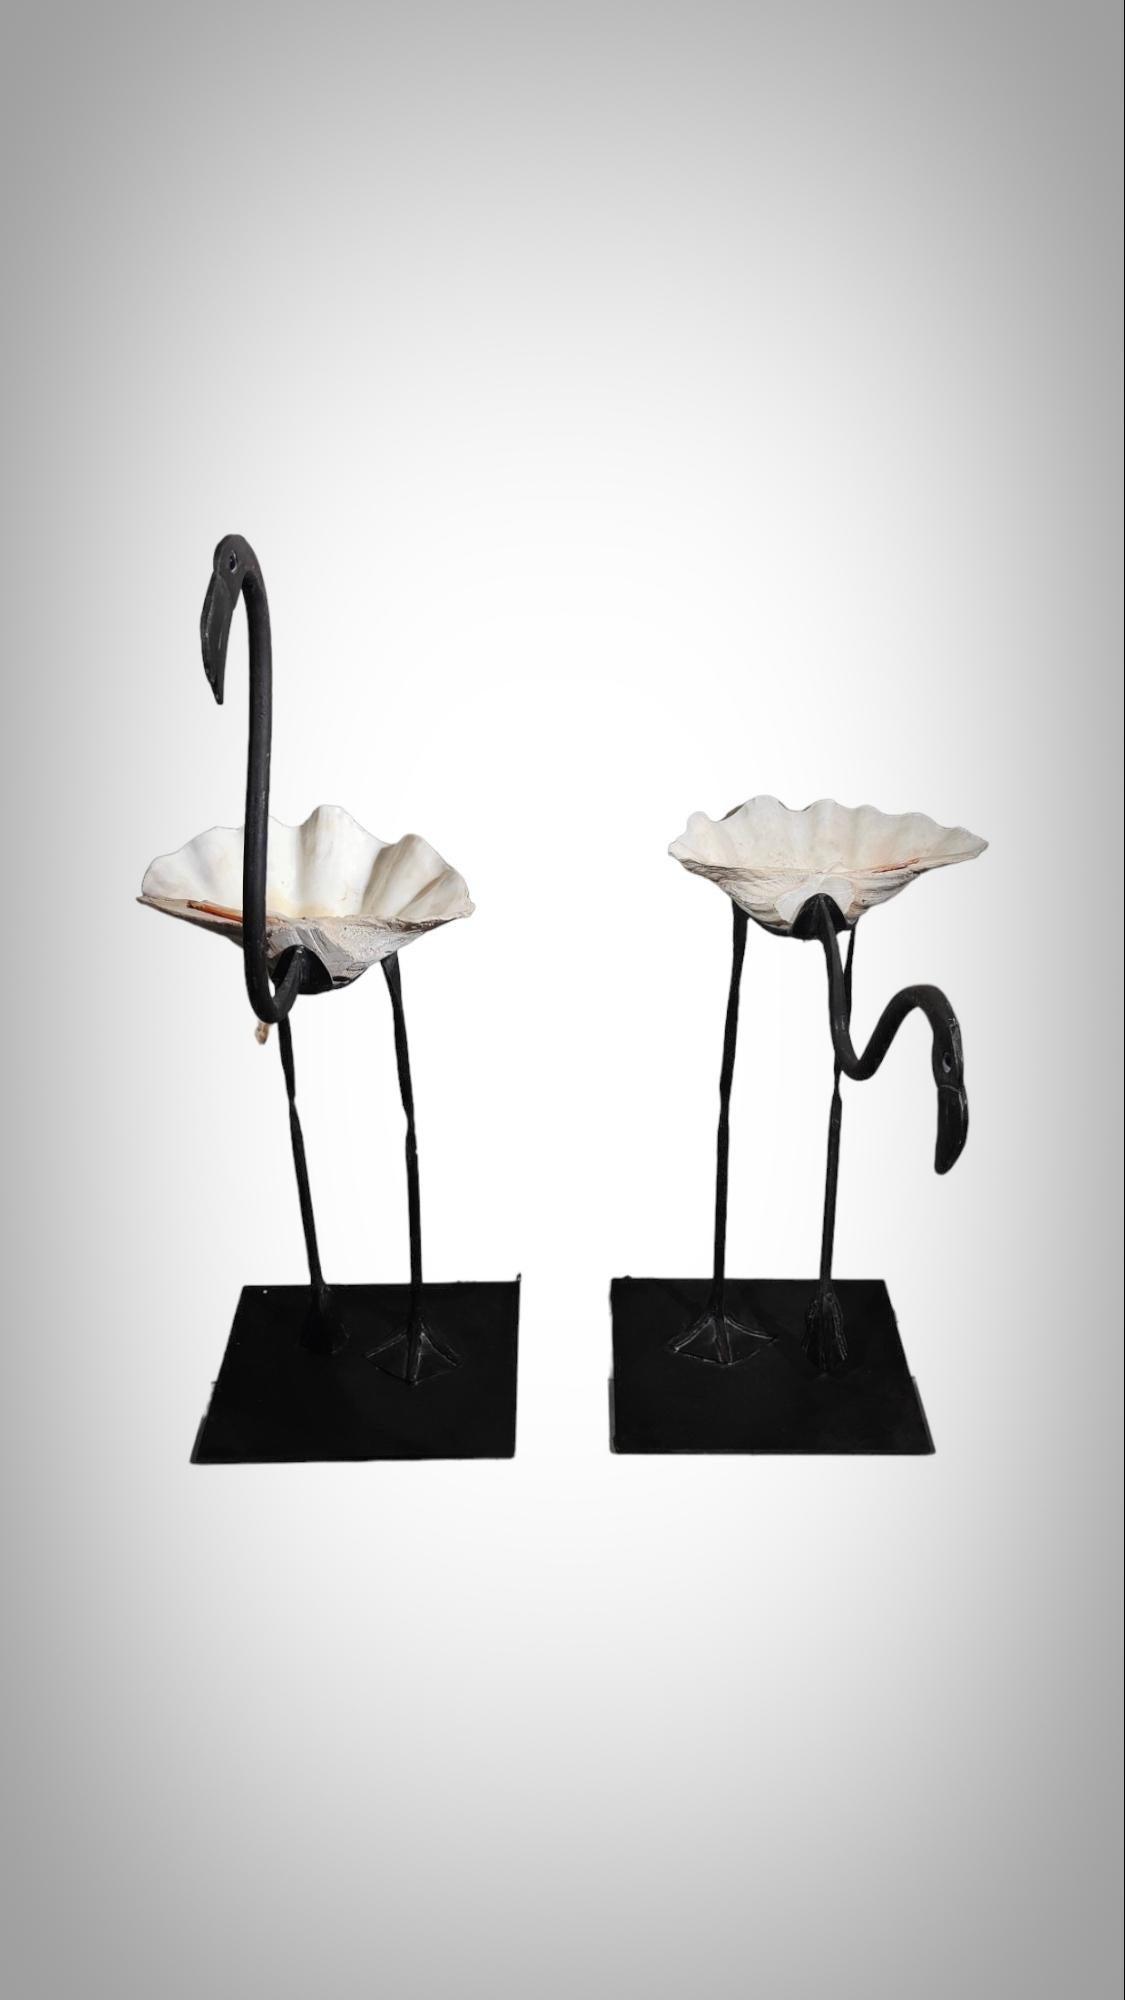 Wrought Iron Sculptures Of Life Size Flamingos
DECORATIVE SCULPTURES FROM THE 1950s IN THE SHAPE OF 2 FLAMINGOS. HOT WORKED WROUGHT IRON AND GIANT SHELL BODY. THE EYES ARE IN TRANSLUCENT VIOLET FACETED CRYSTAL. VERY DECORATIVE AND IN OVERALL GOOD